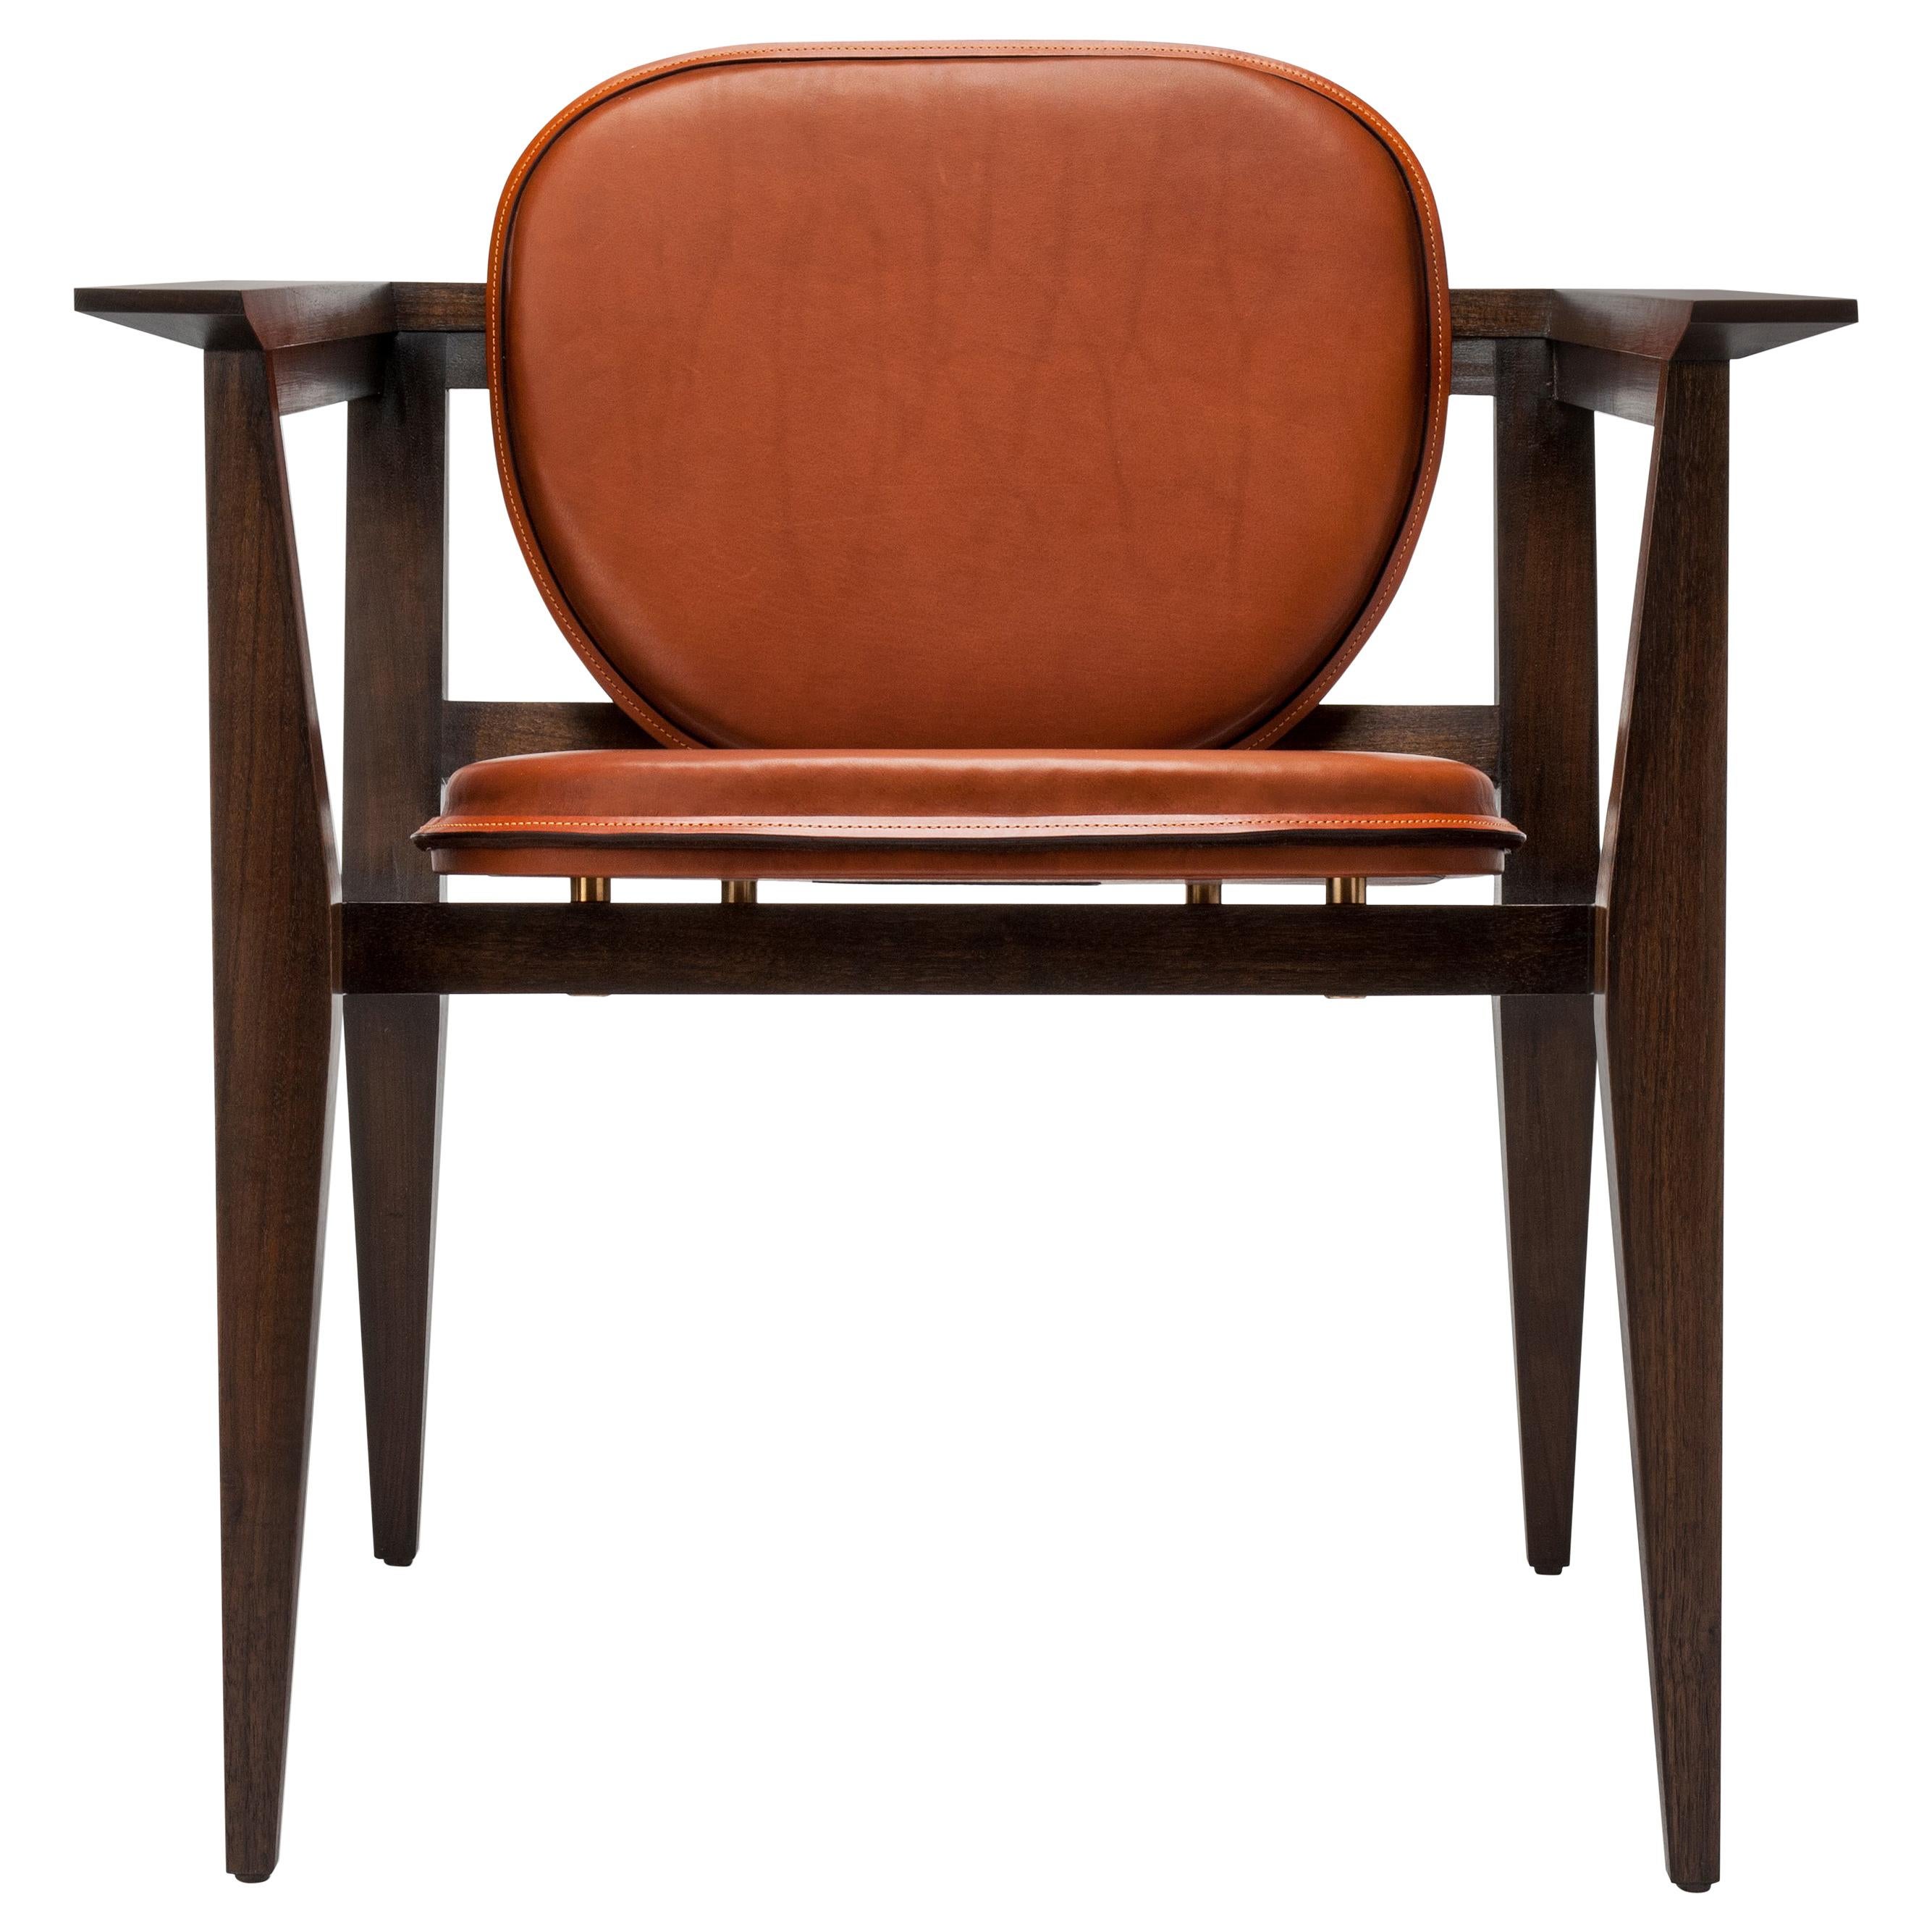 Contemporary Constructor Armchair in Tan Saddle Leather and Solid Walnut